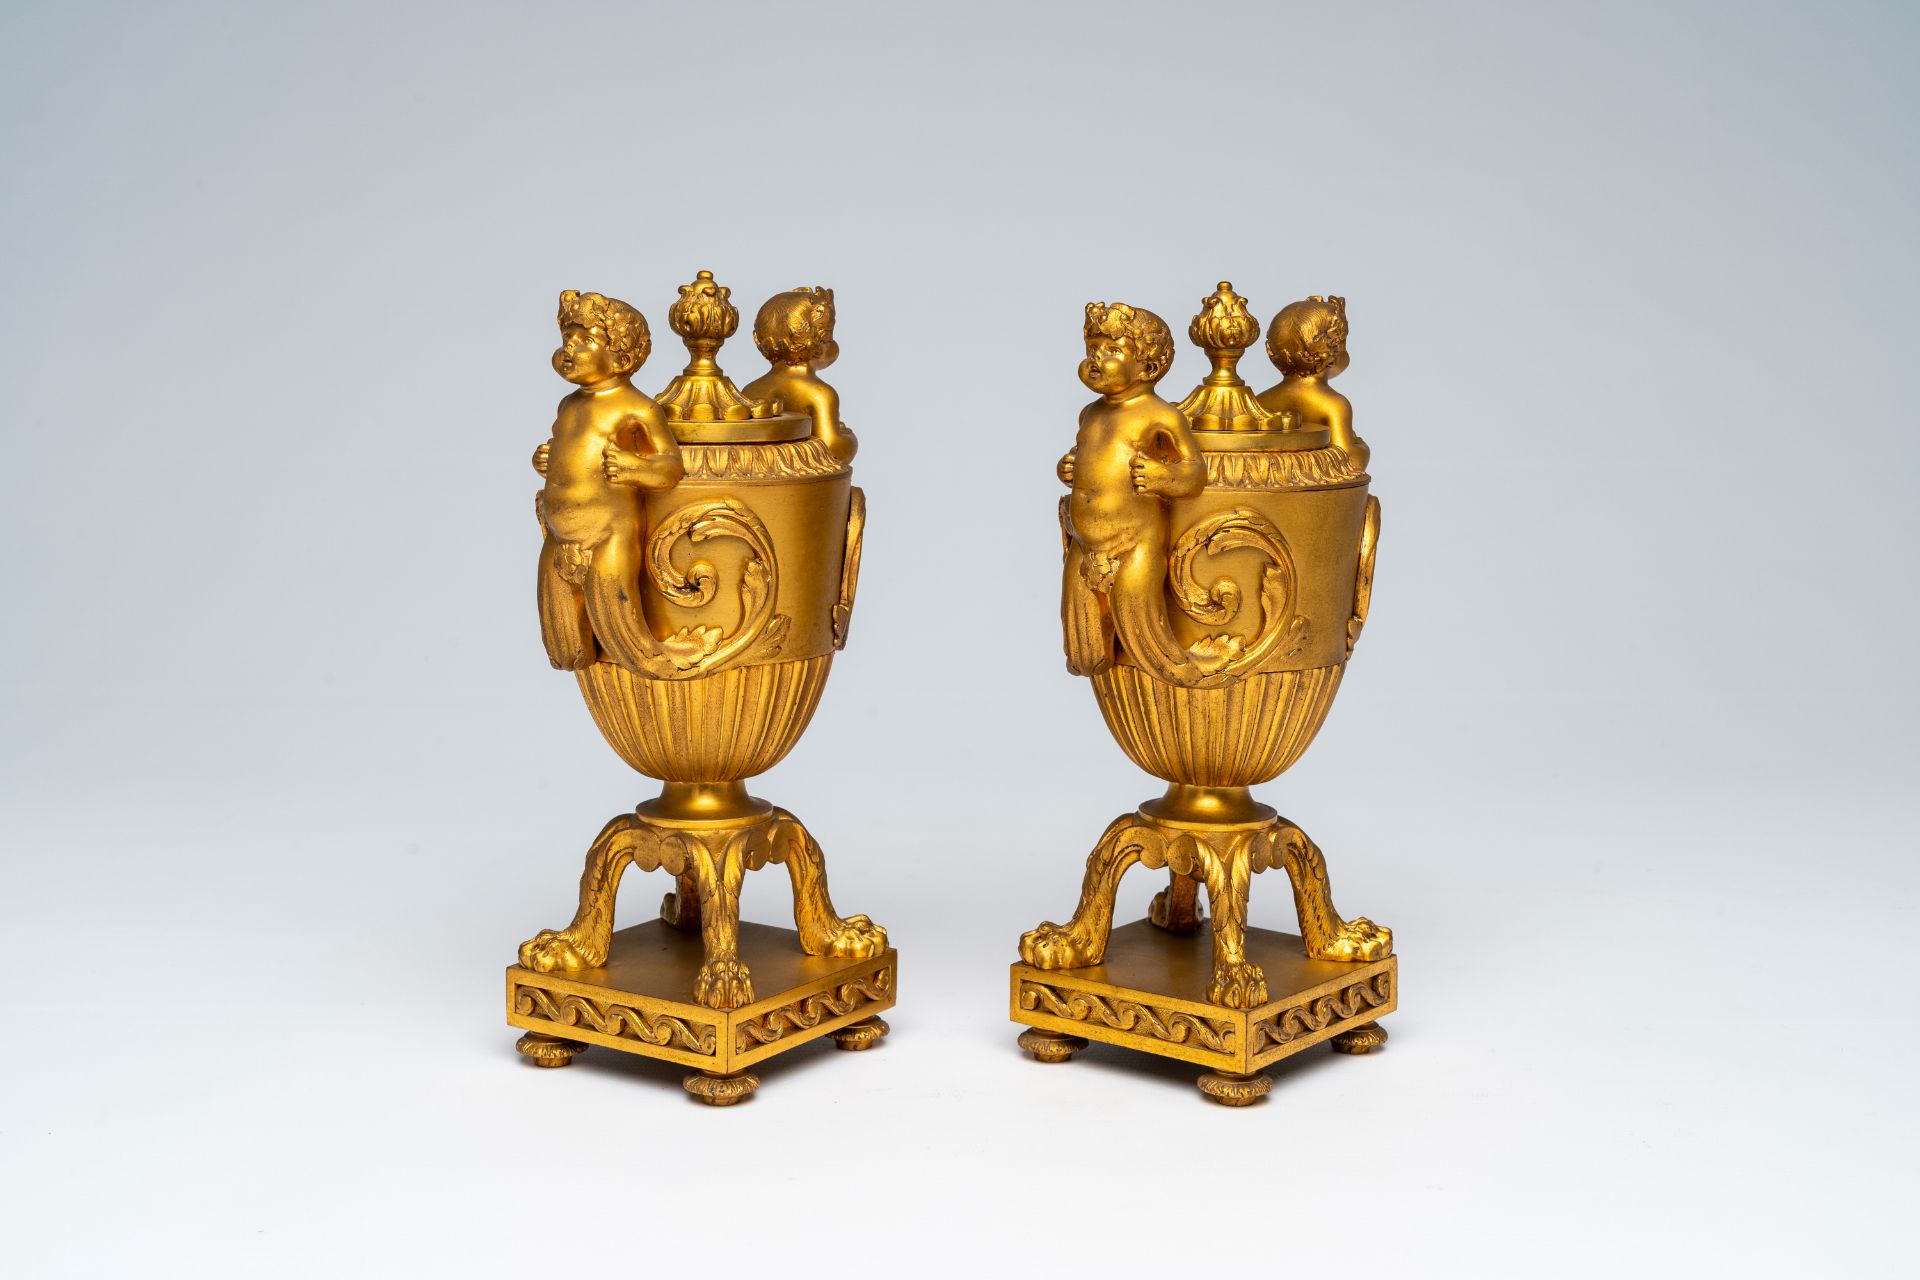 A pair of French gilt bronze vases and covers with bacchantes and lion's feet convertible into candl